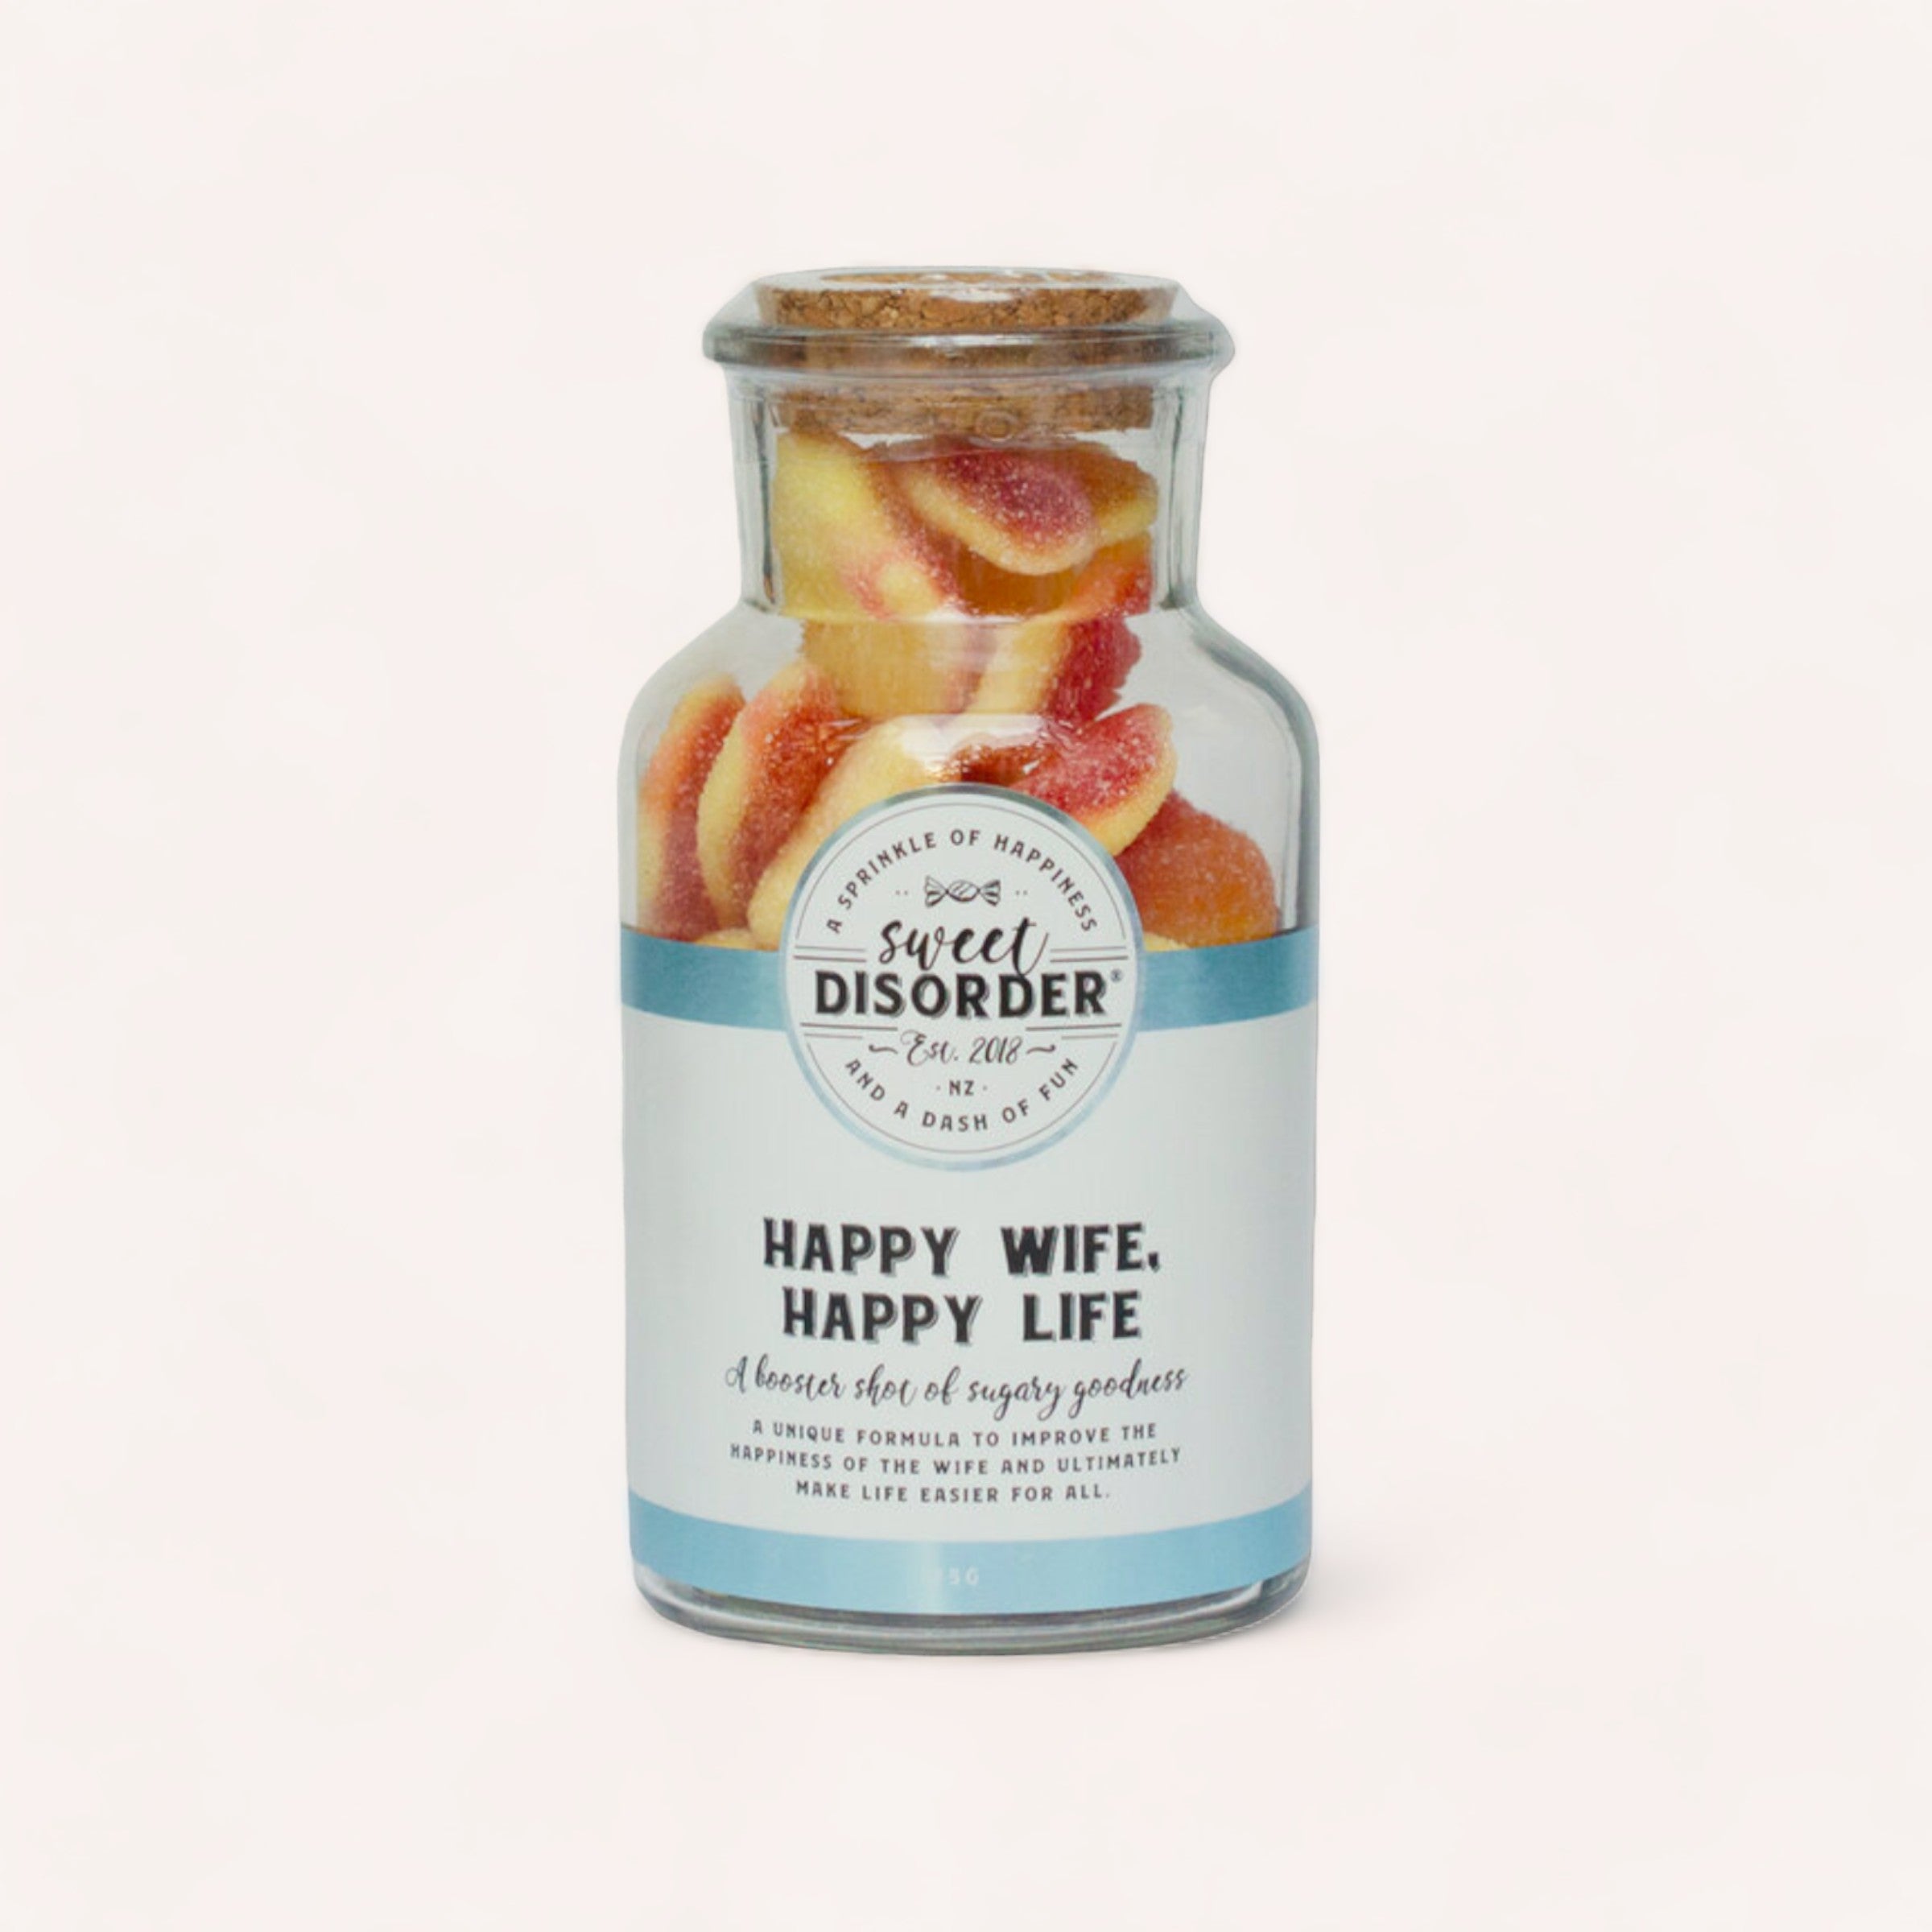 A jar of love infused sour peach hearts labeled "Happy Wife, Happy Life Lollies" from Sweet Disorder, a humorous themed confectionery brand.